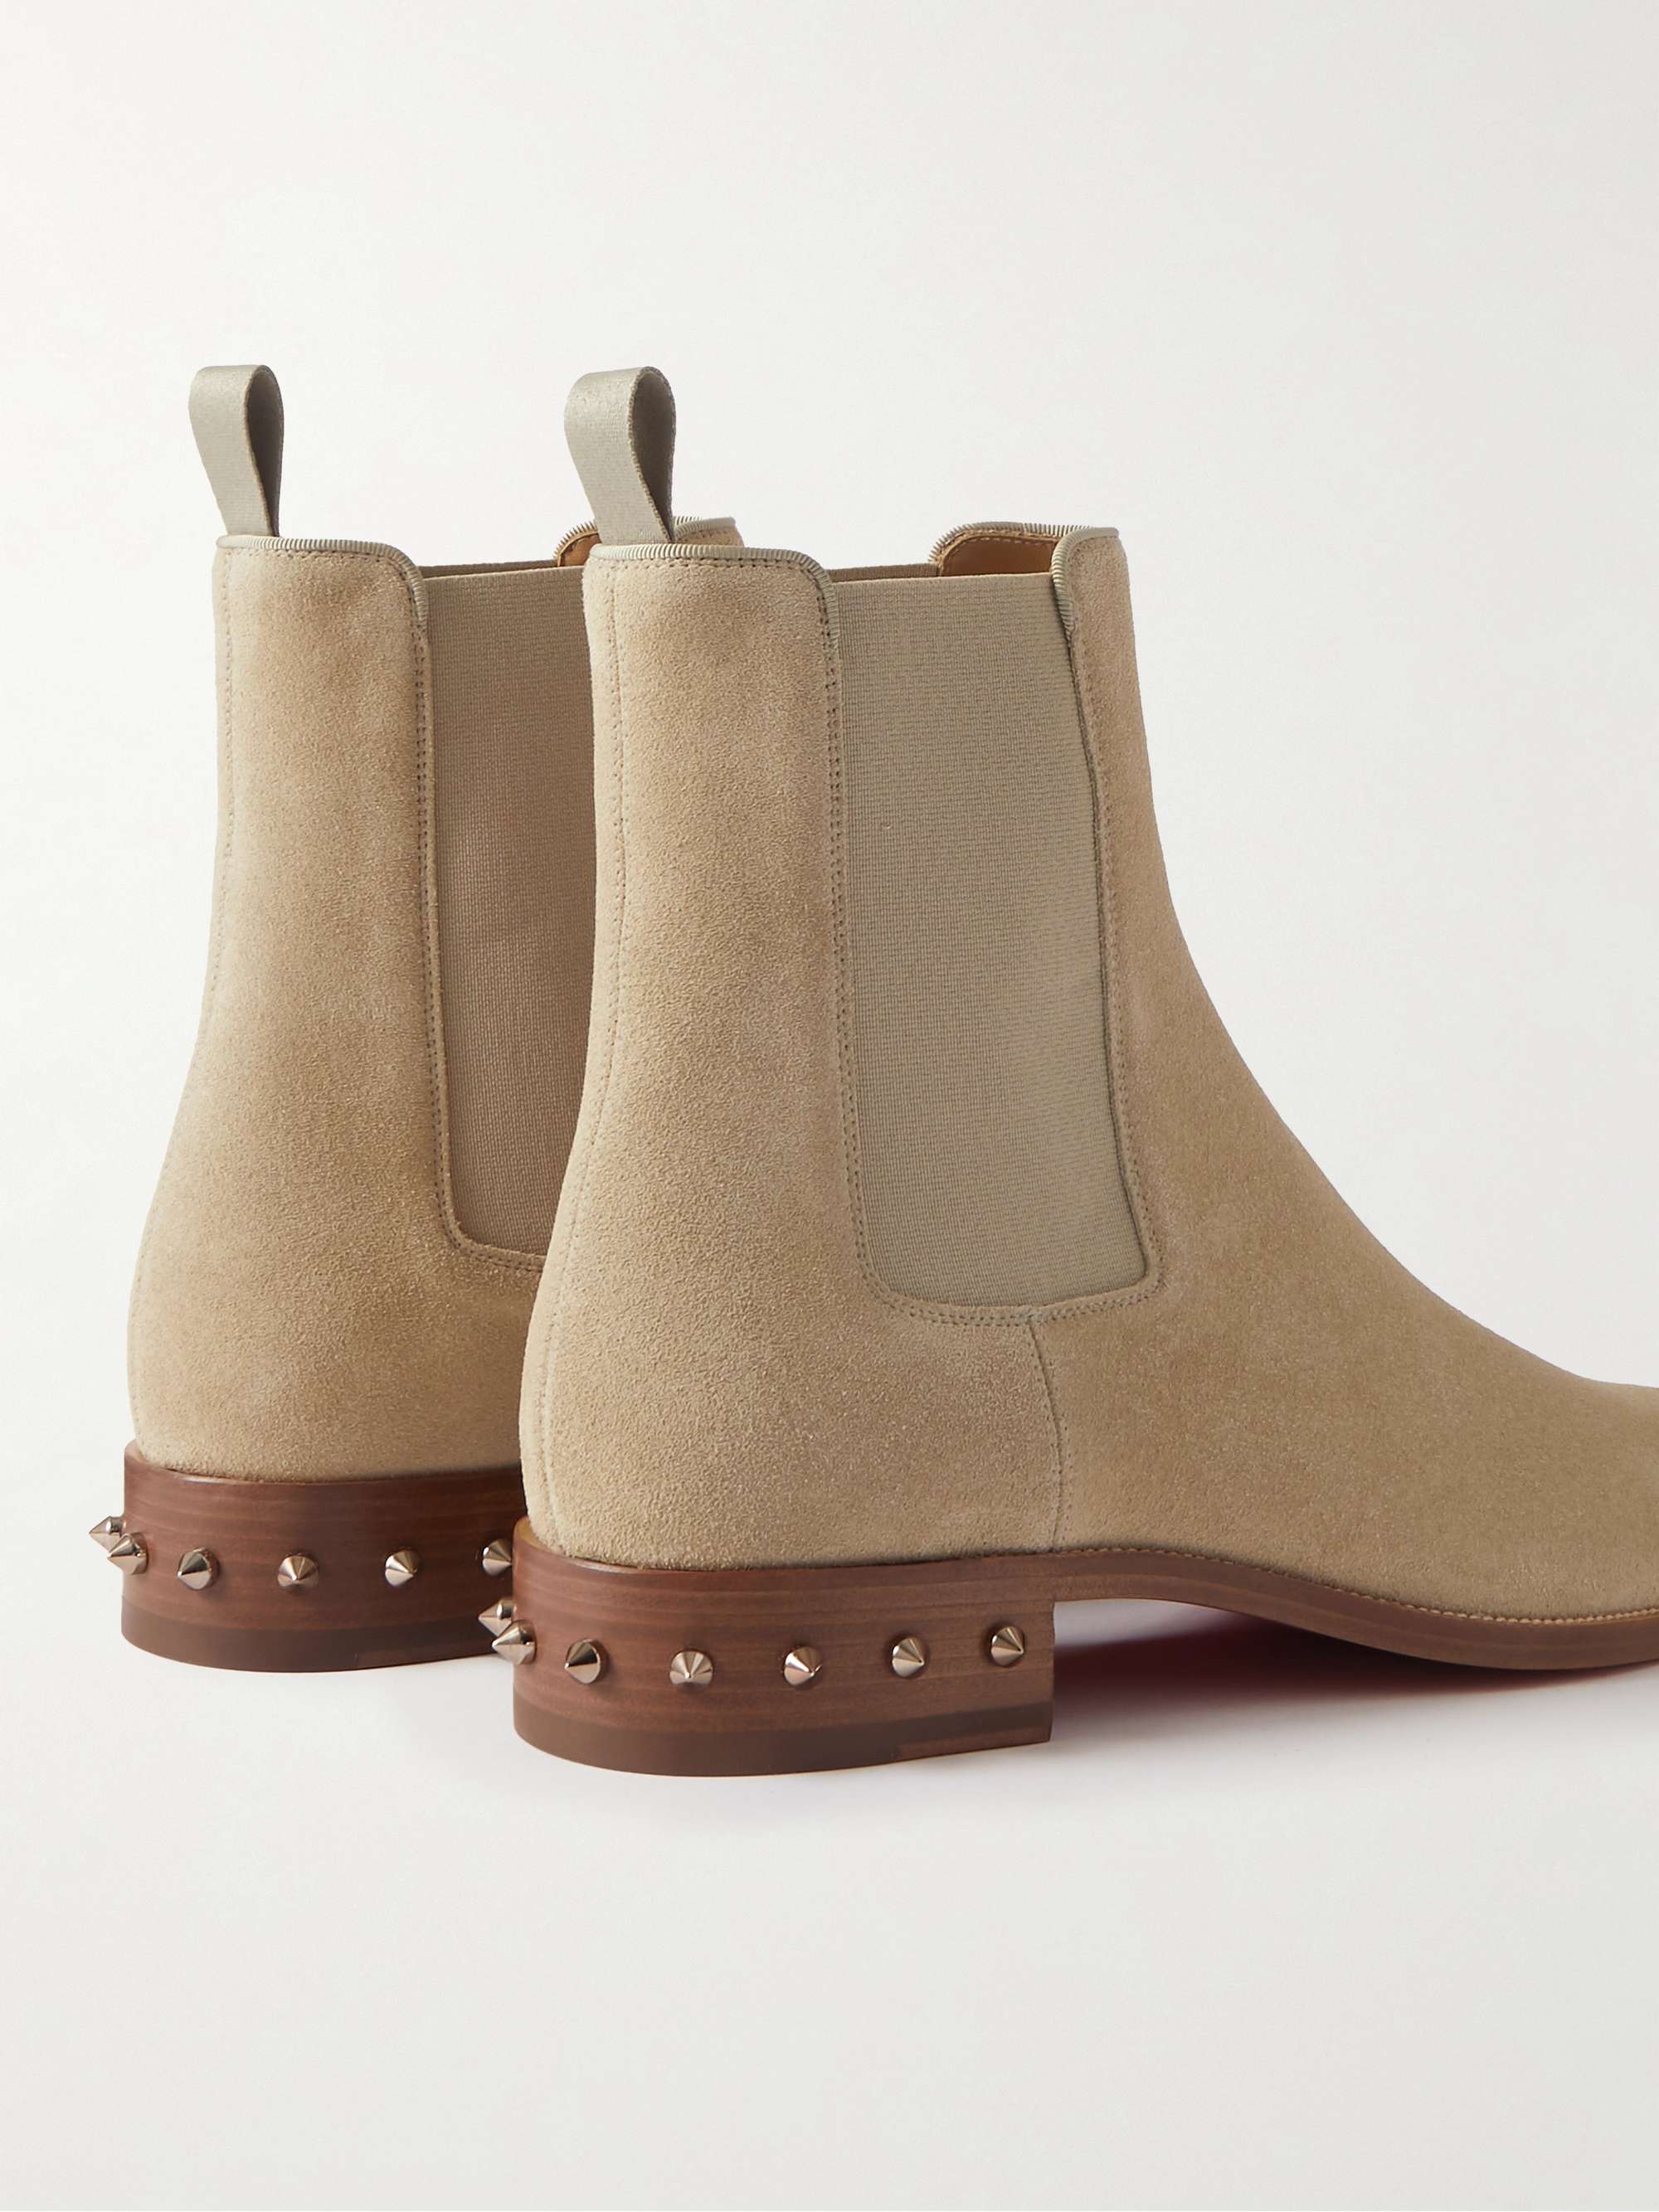 CHRISTIAN LOUBOUTIN So Samson Studded Suede Chelsea Boots